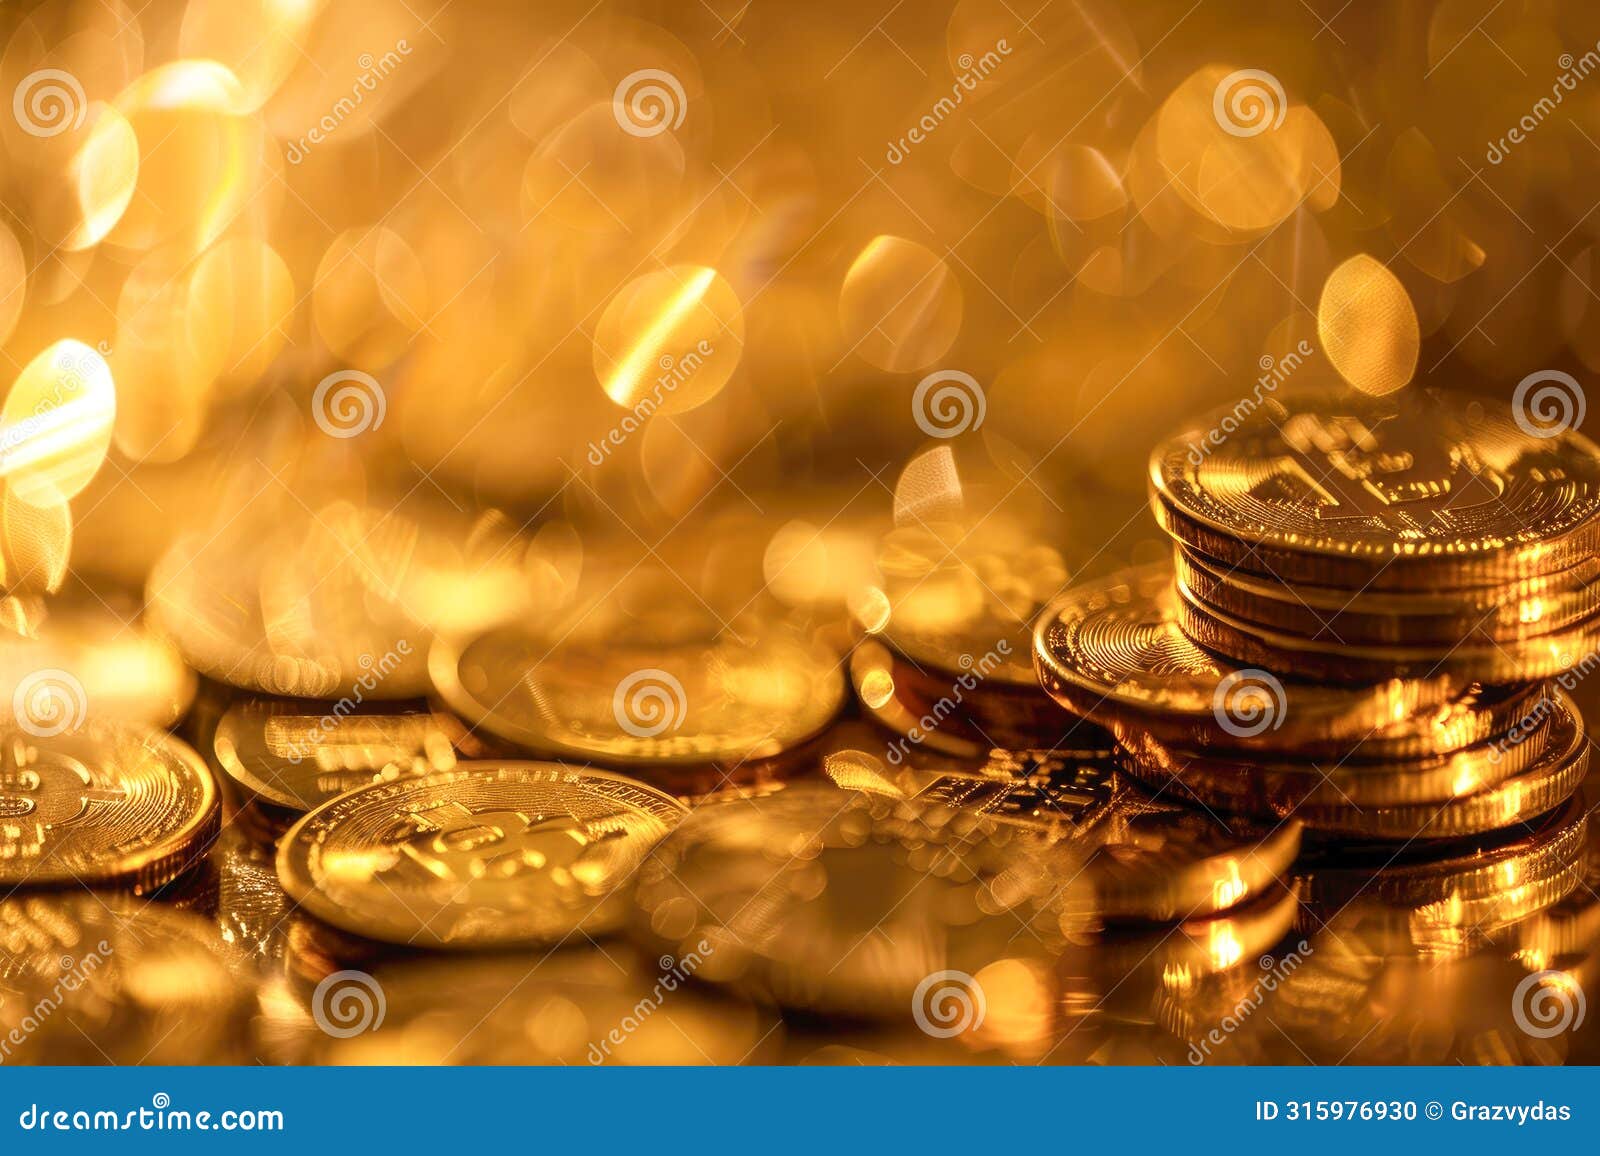 golden bitcoin coins pile in blurry close-up. shallow dof